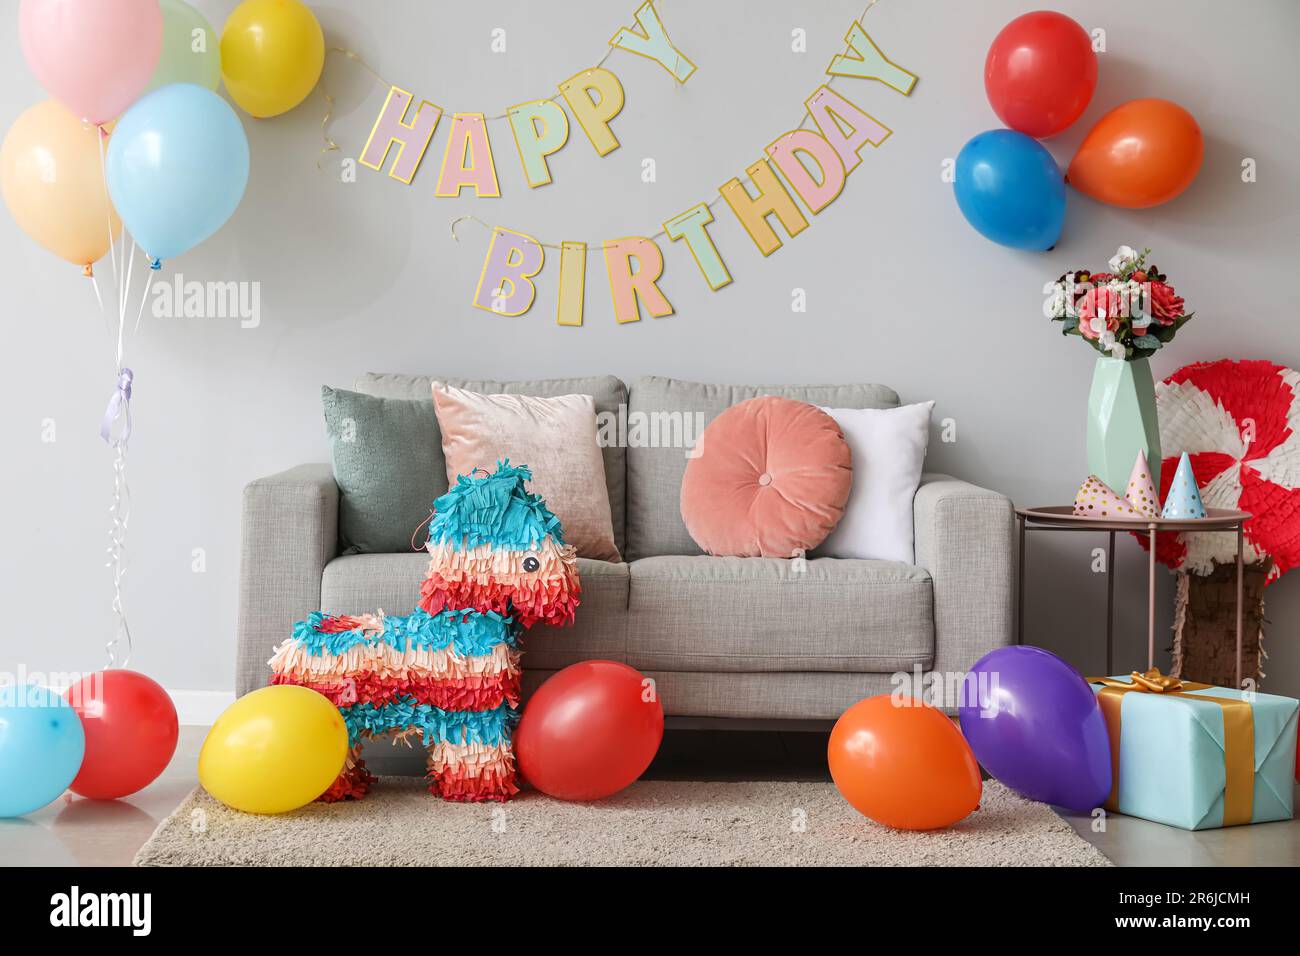 Interior of living room decorated for birthday with balloons ...